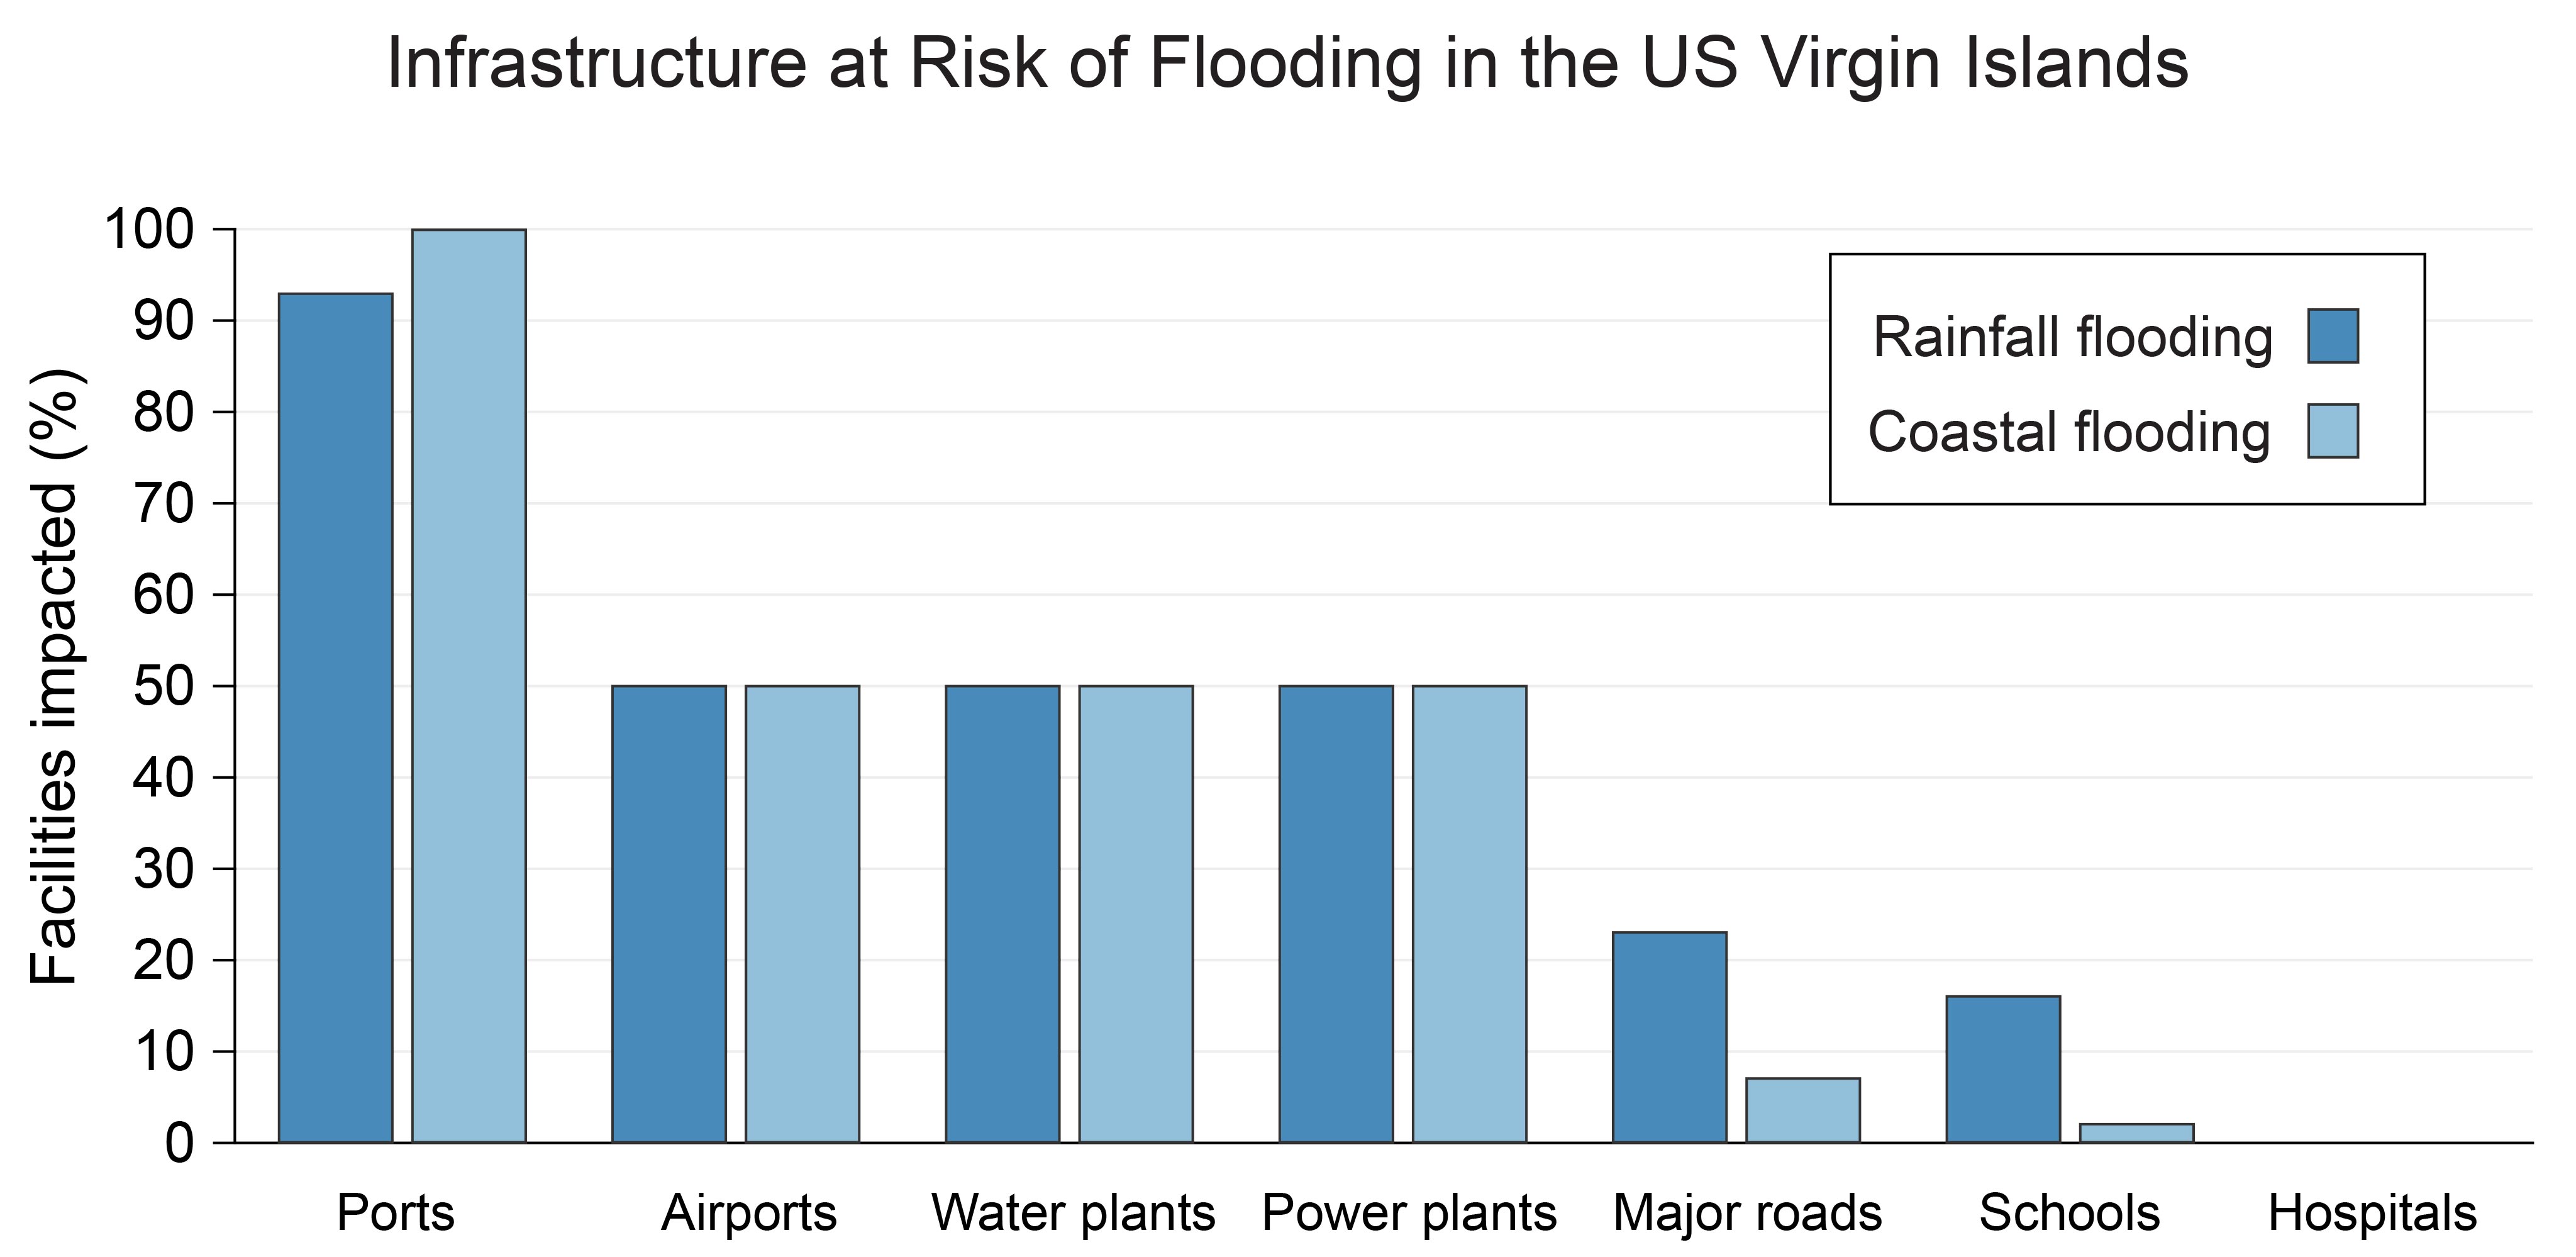 Infrastructure at Risk of Flooding in the US Virgin Islands